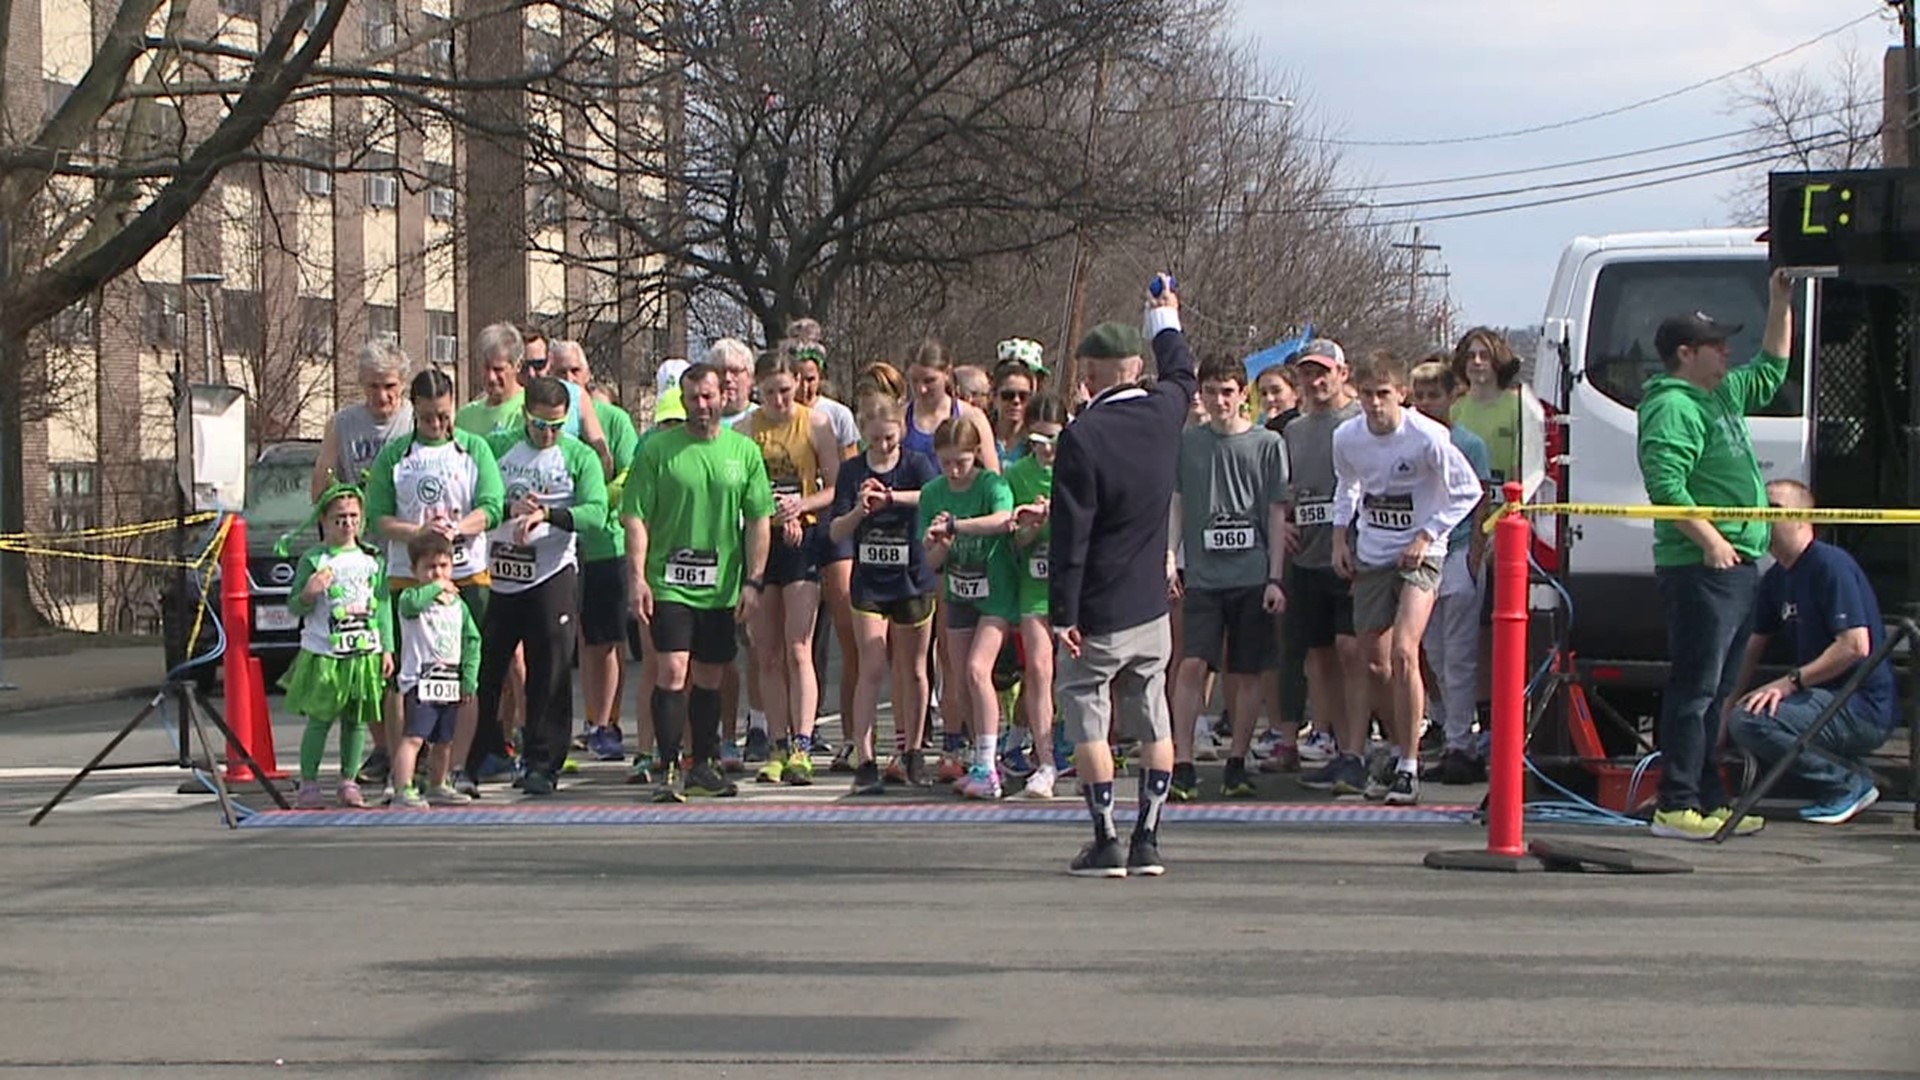 Before kicking off the return of the Scranton St. Patrick's parade, a memorial foot race was held along the same route.